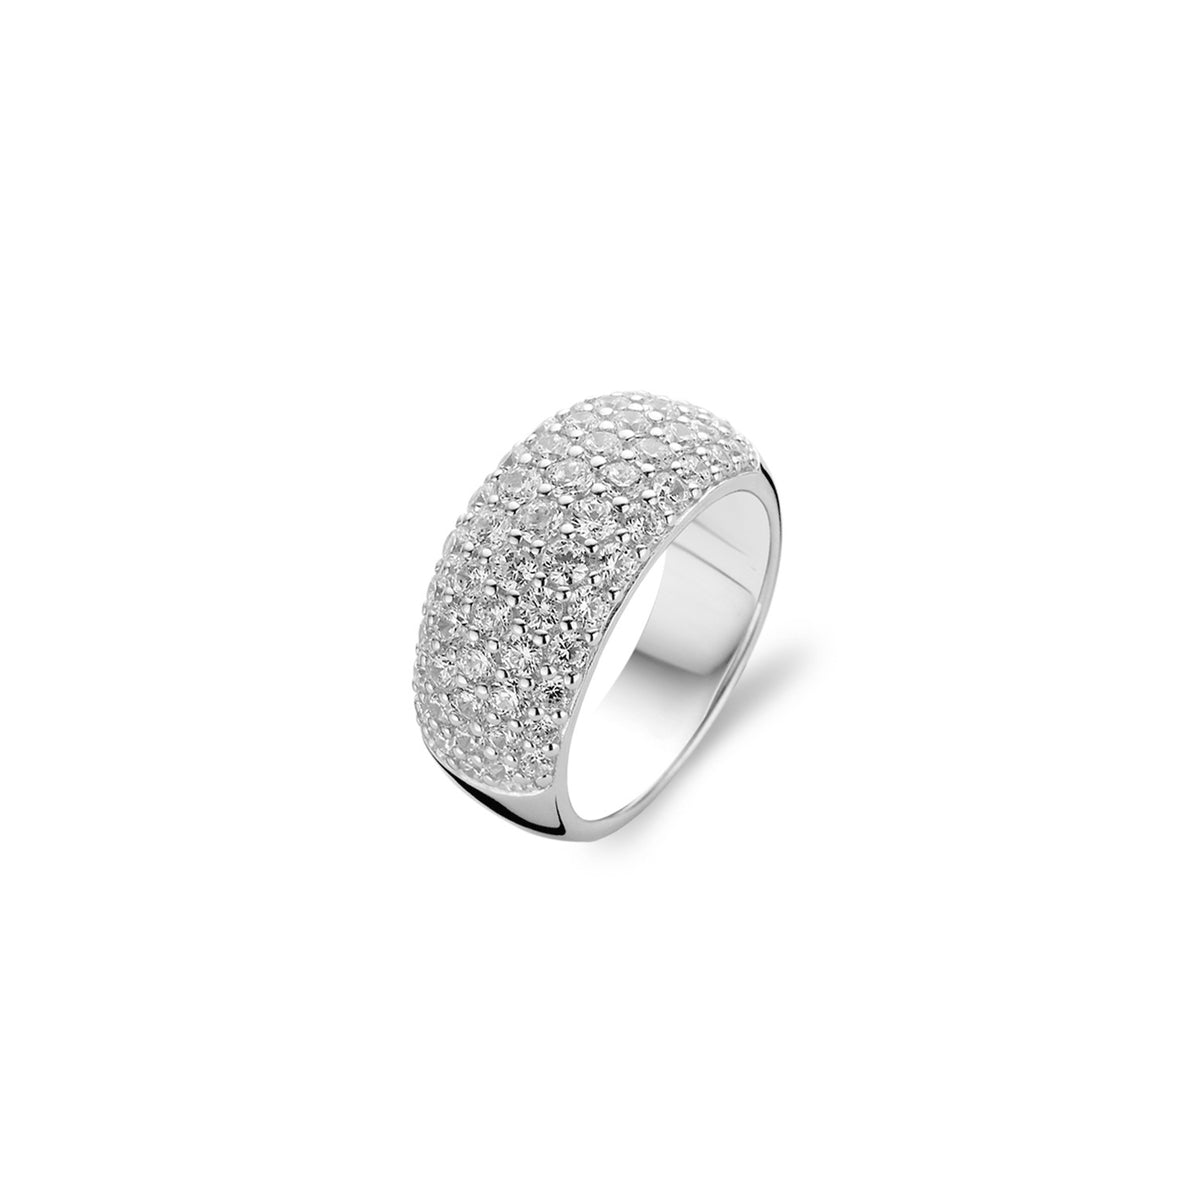 TI SENTO Five Row Pave Sterling Silver Ring